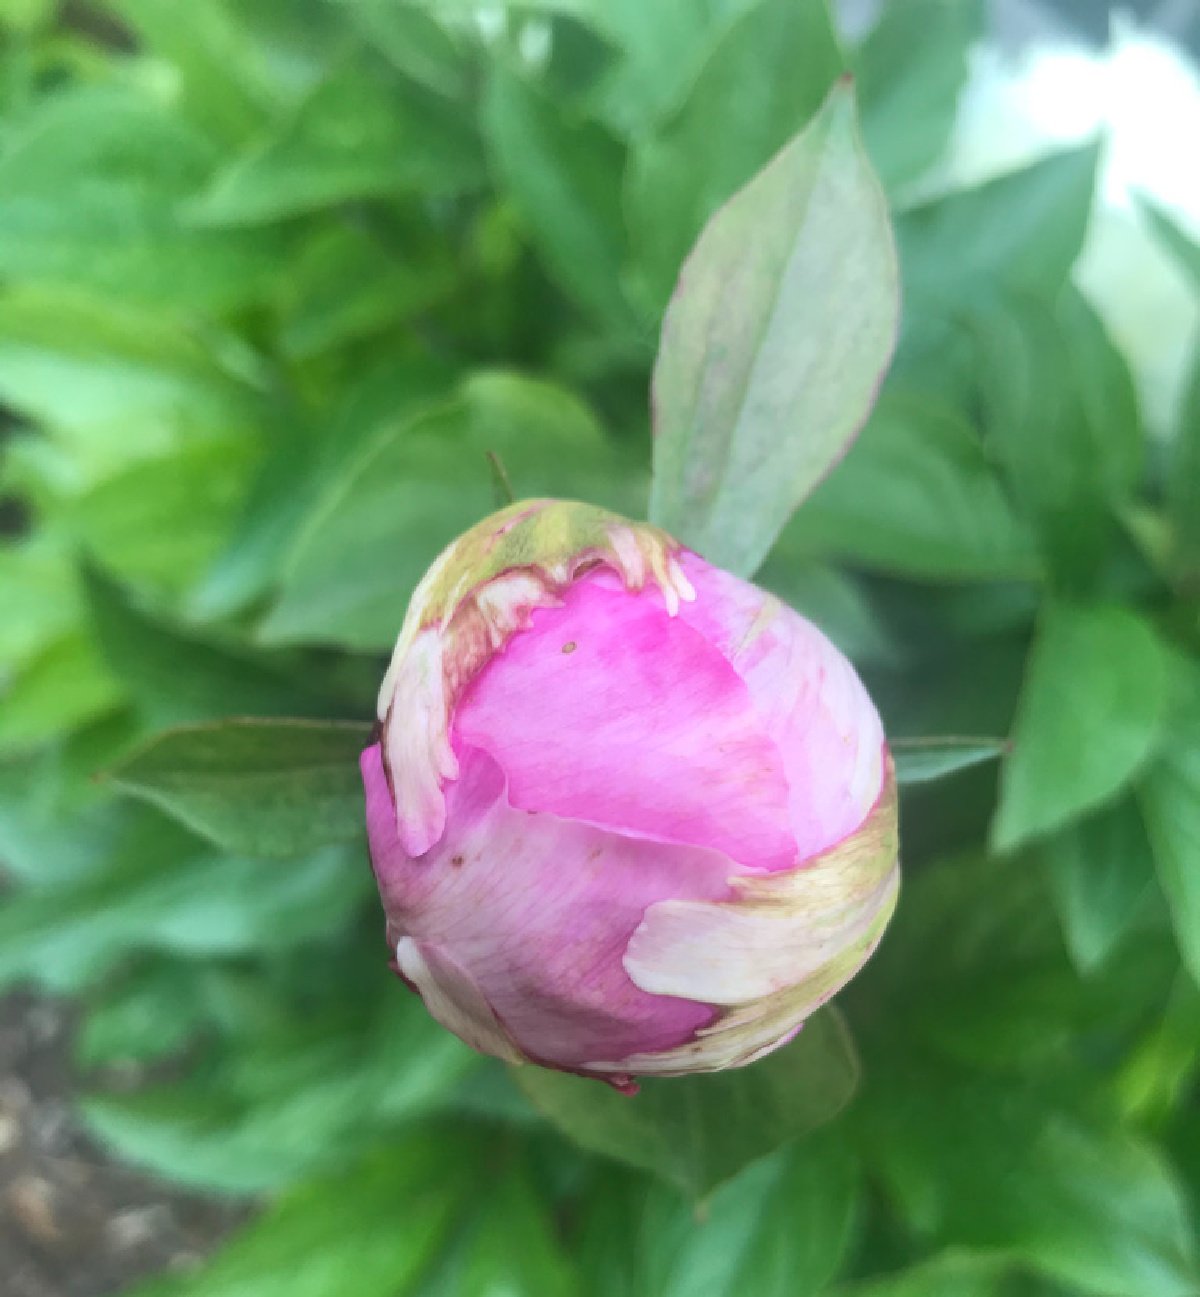 a darker pink peony bud against the dark green peony leaves